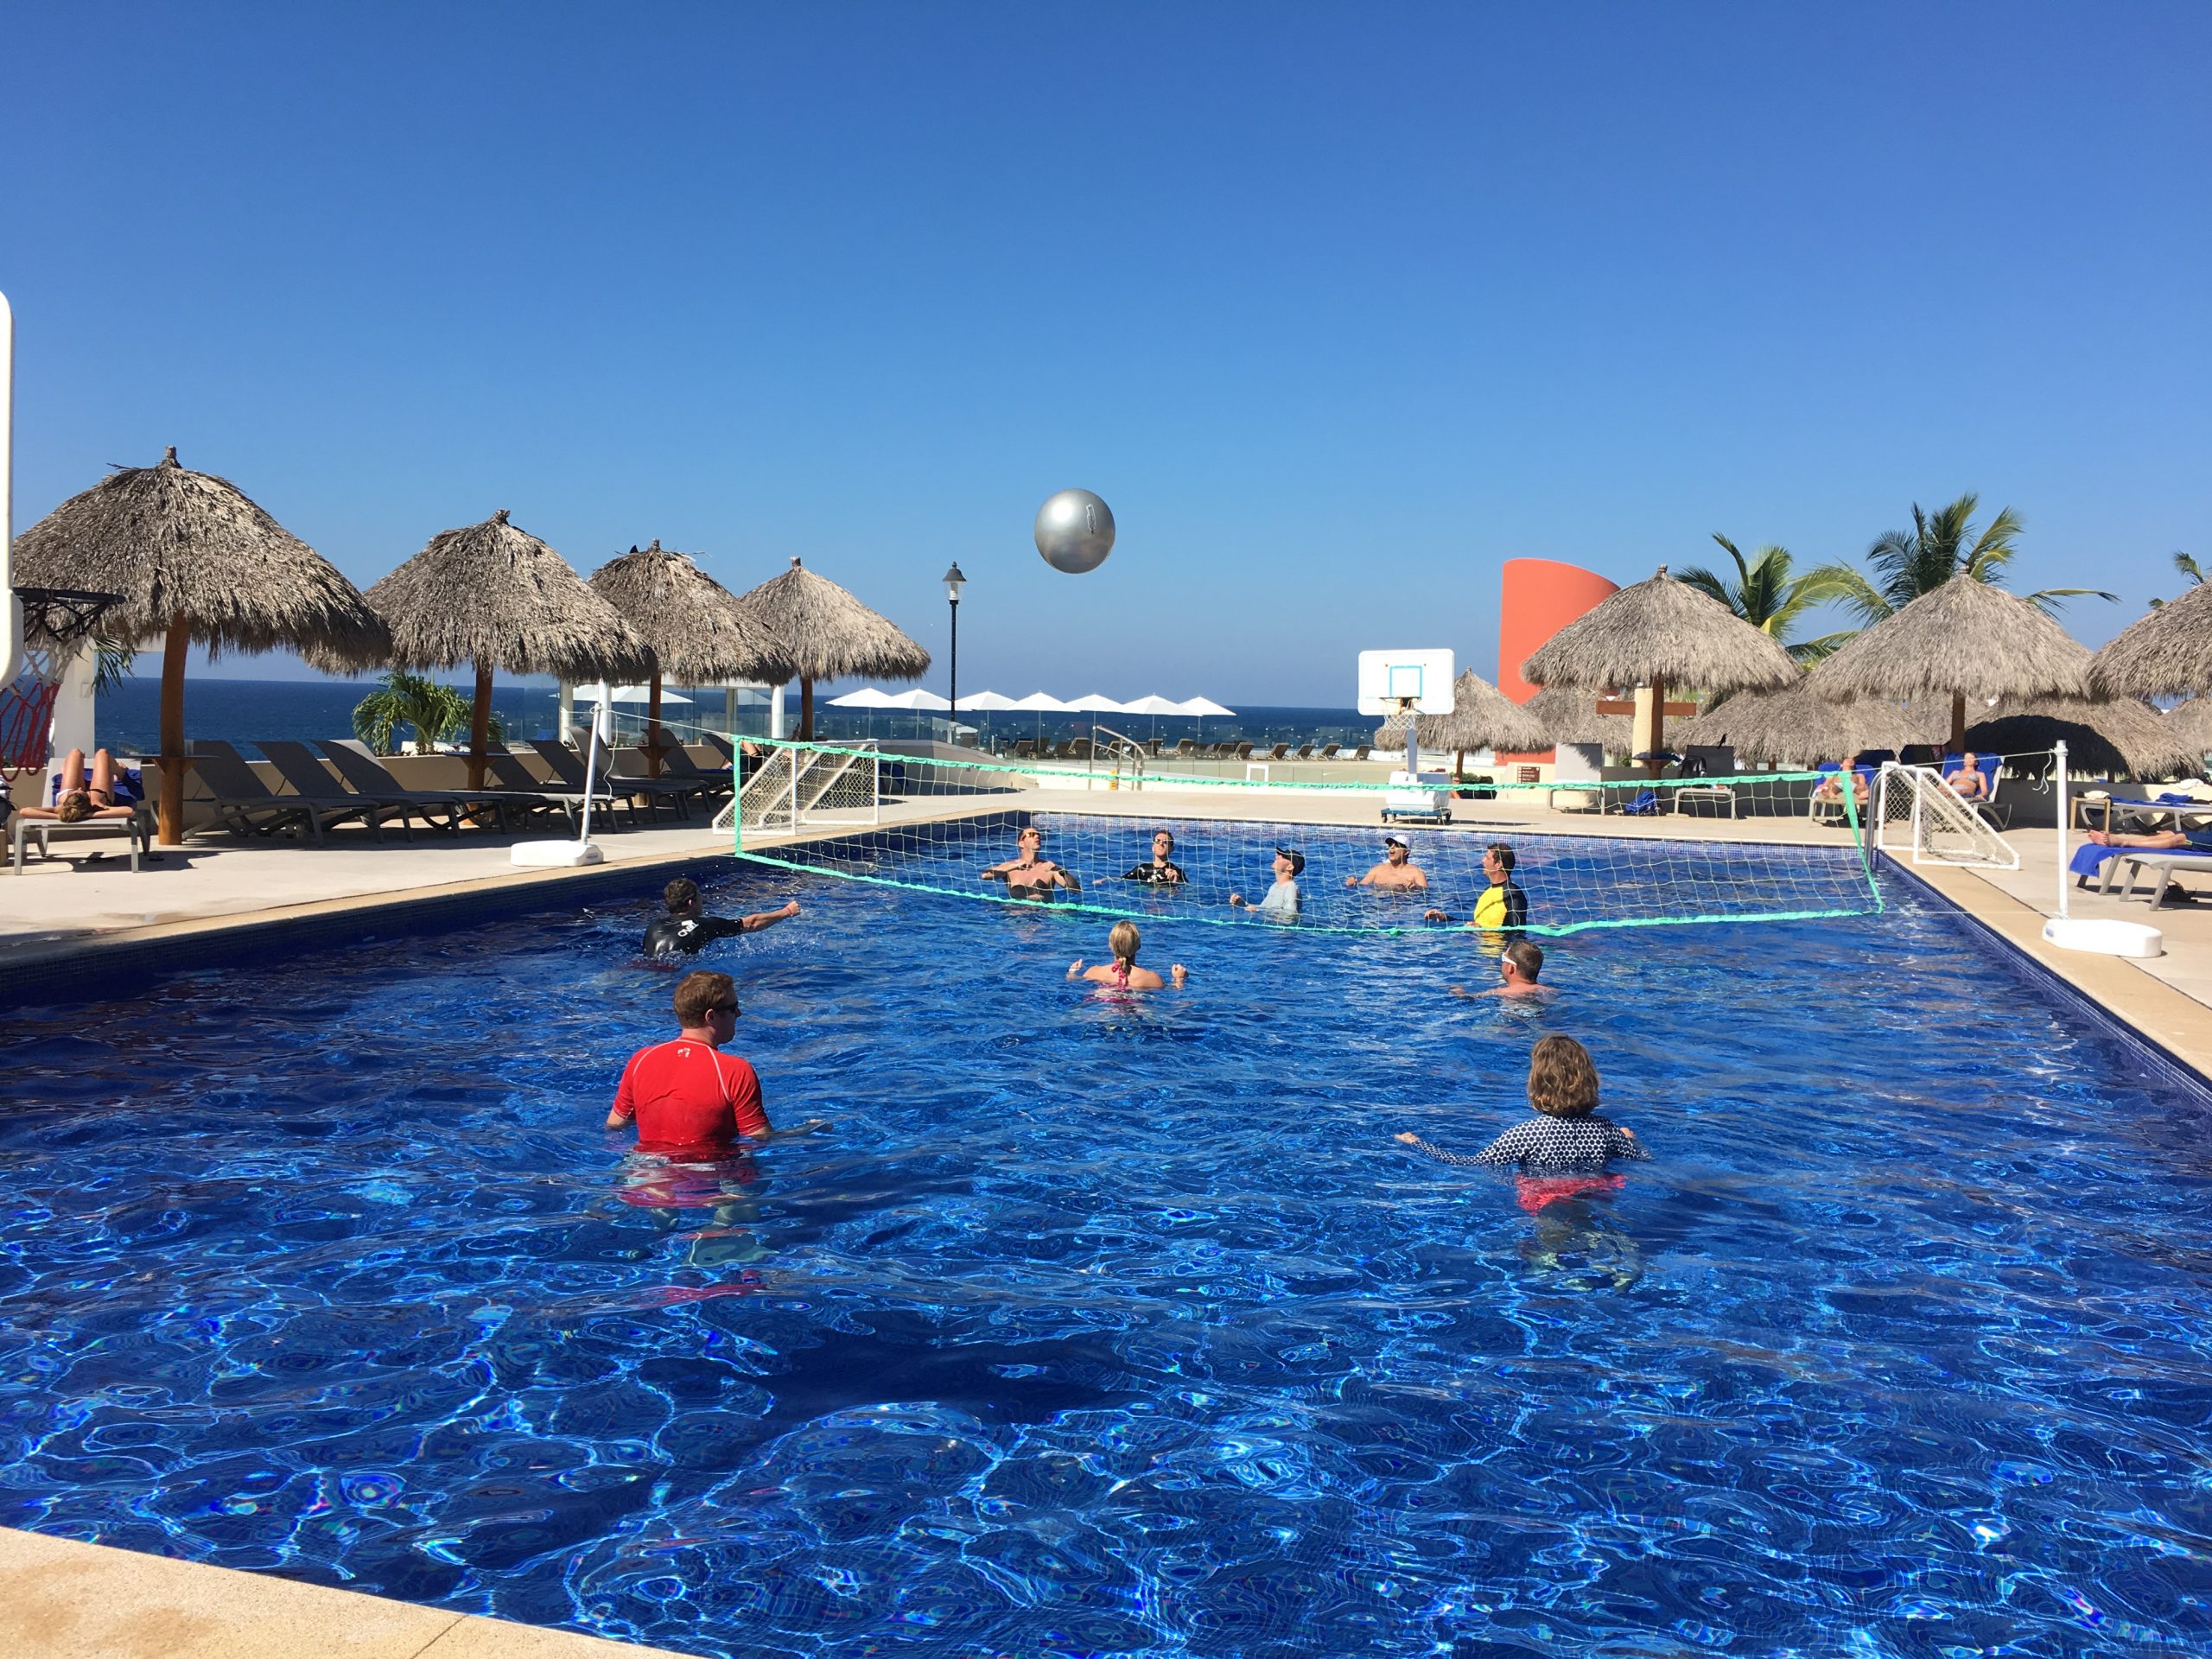 People playing volley ball in swimming pool at resort hotel with ocean view in the background.